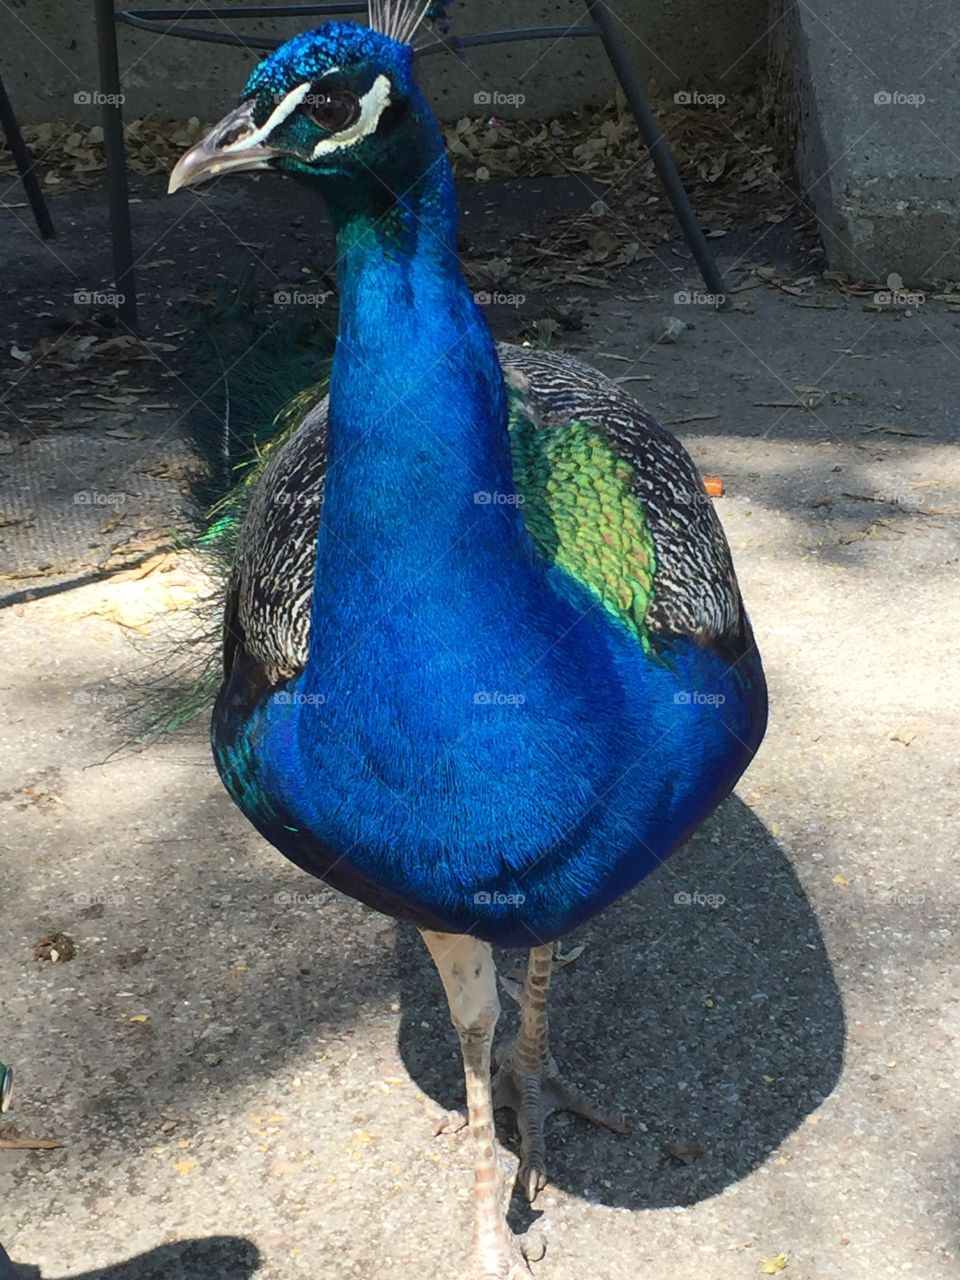 Friendly peacock at Henry Doorly Zoo